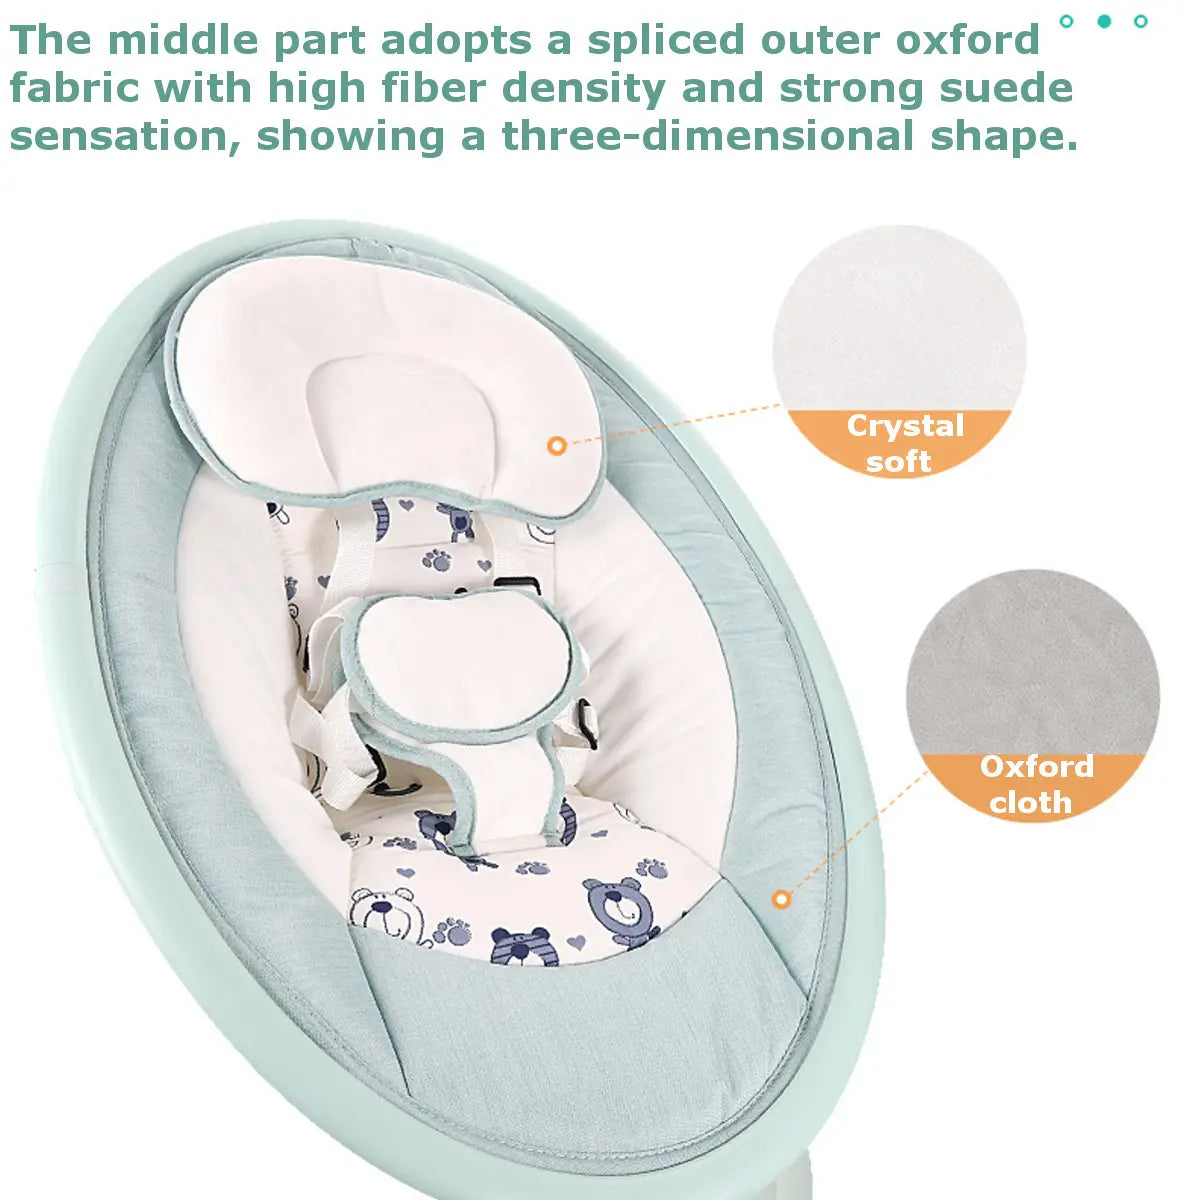 Bioby Baby Swing Bouncer Chair, Multi-function Music